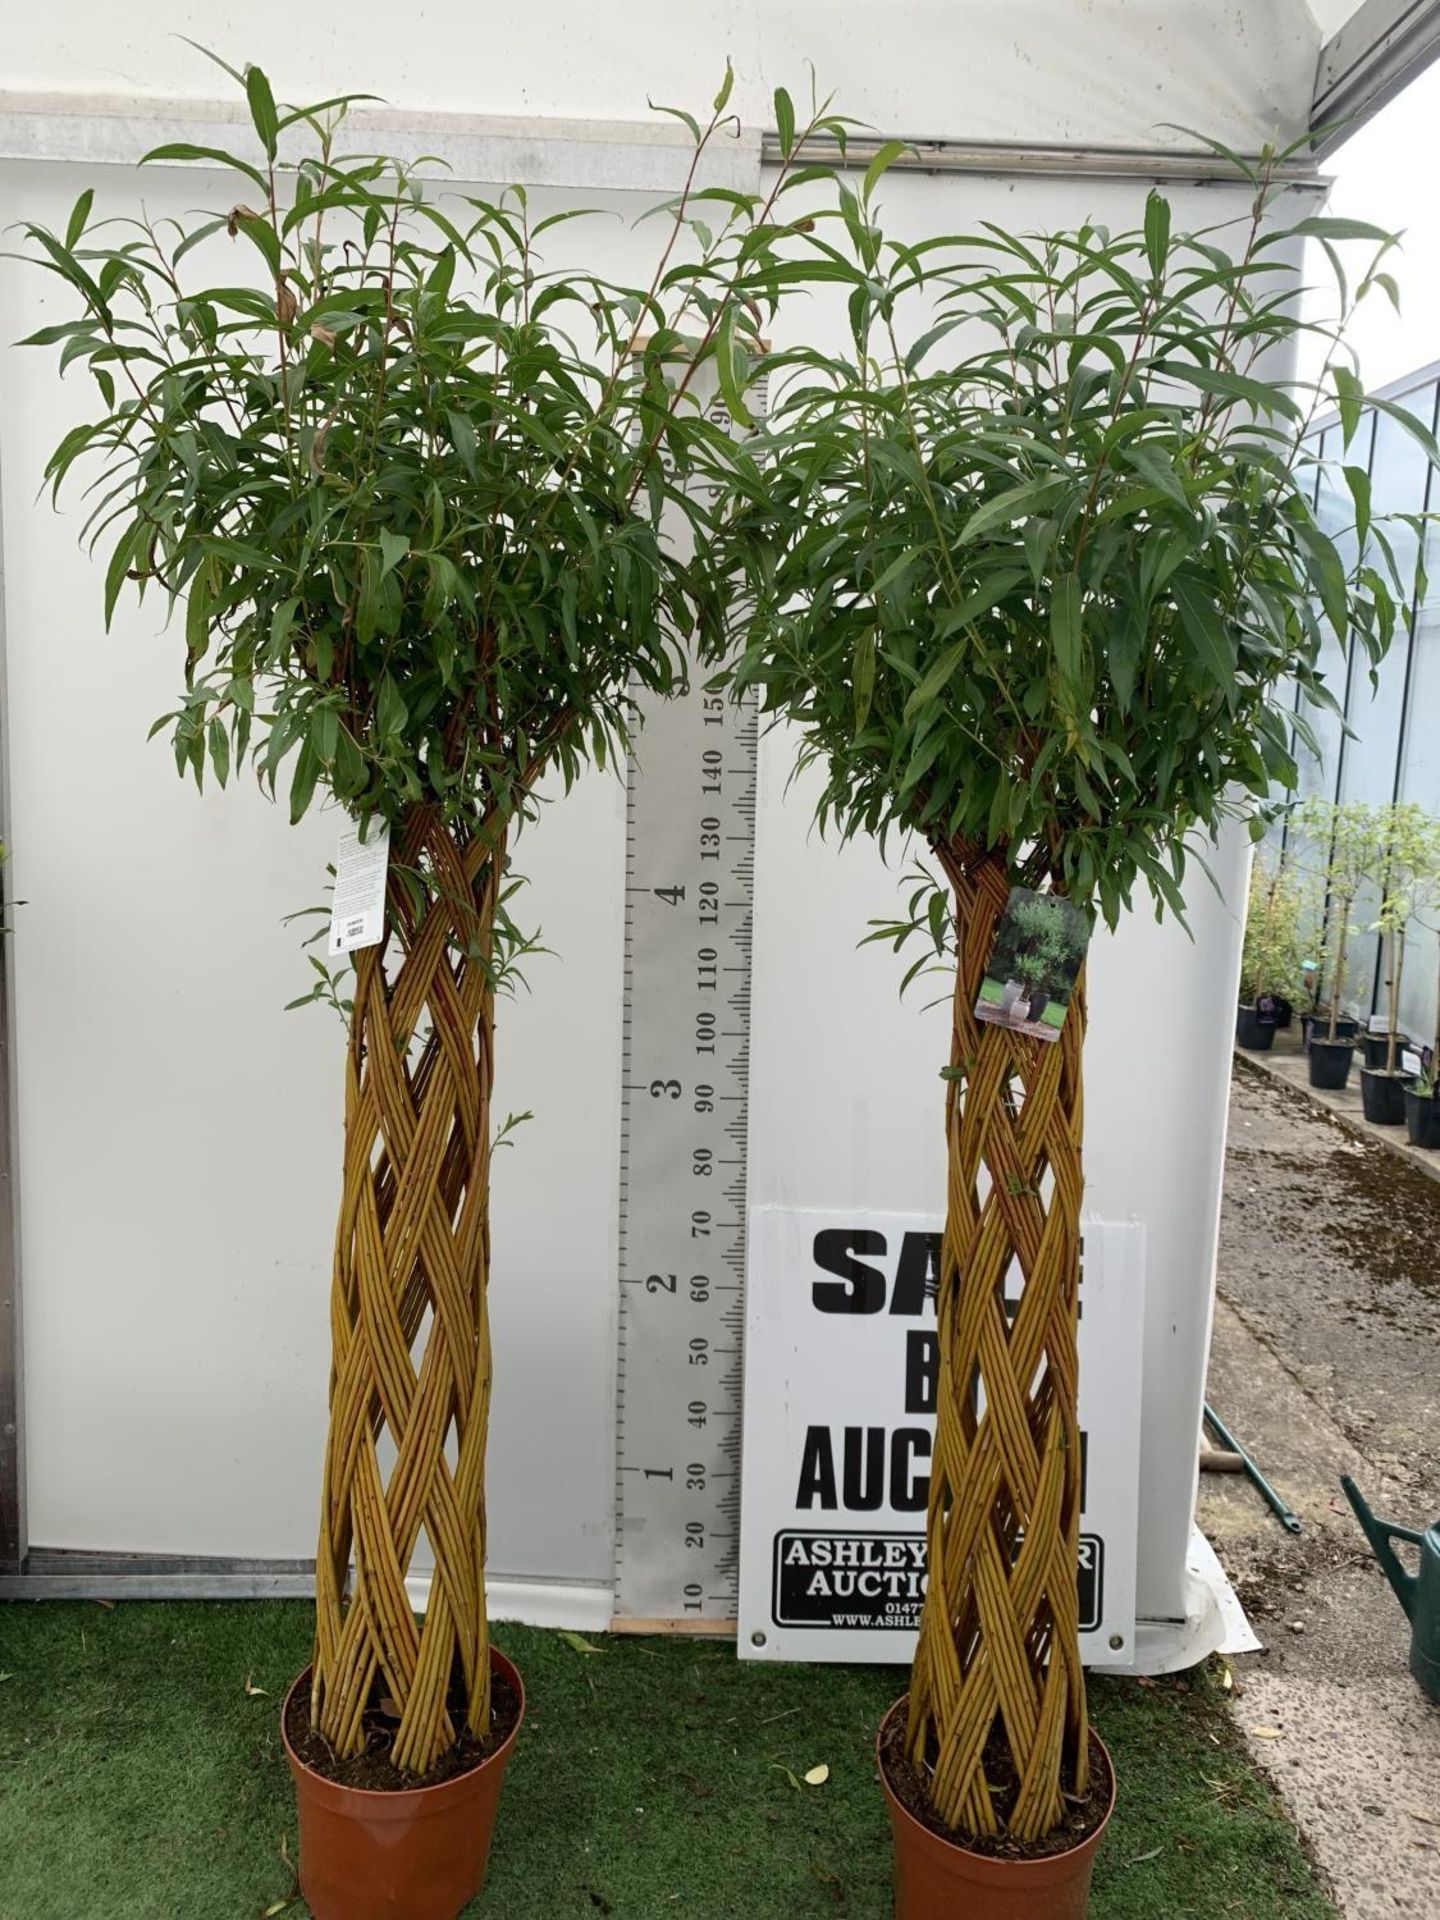 TWO SALIX LIVING WILLOW TREES IN 7.5 LTR POTS OVER 2 METRES IN HEIGHT TO BE SOLD FOR THE TWO PLUS - Image 4 of 22